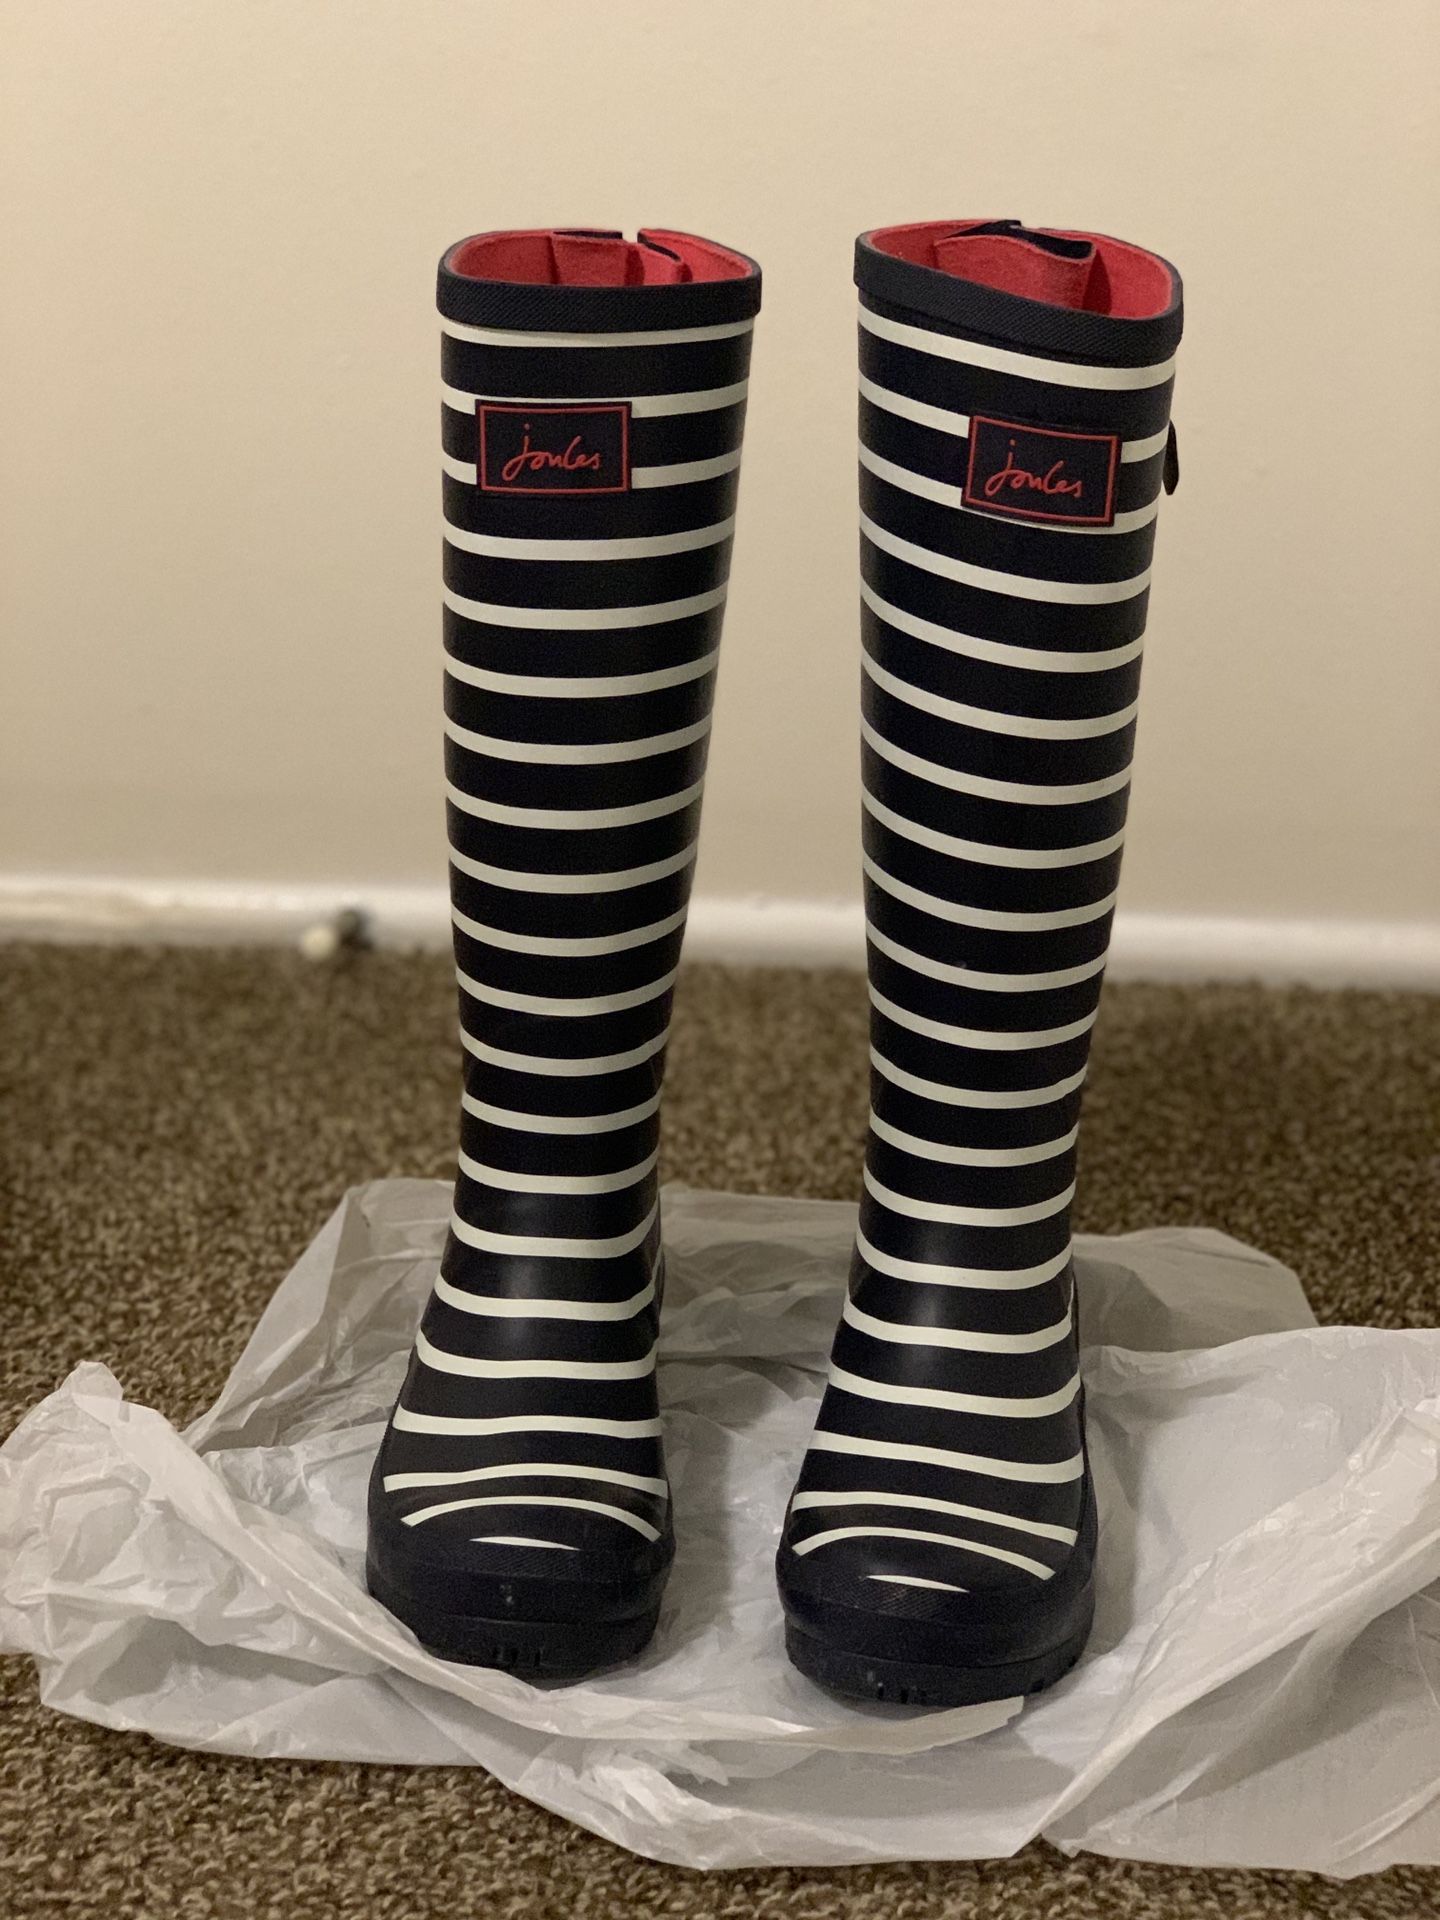 Joules Women’s Tall Rain Boots Welly Print Size 6 Adjustable Calf and Waterproof